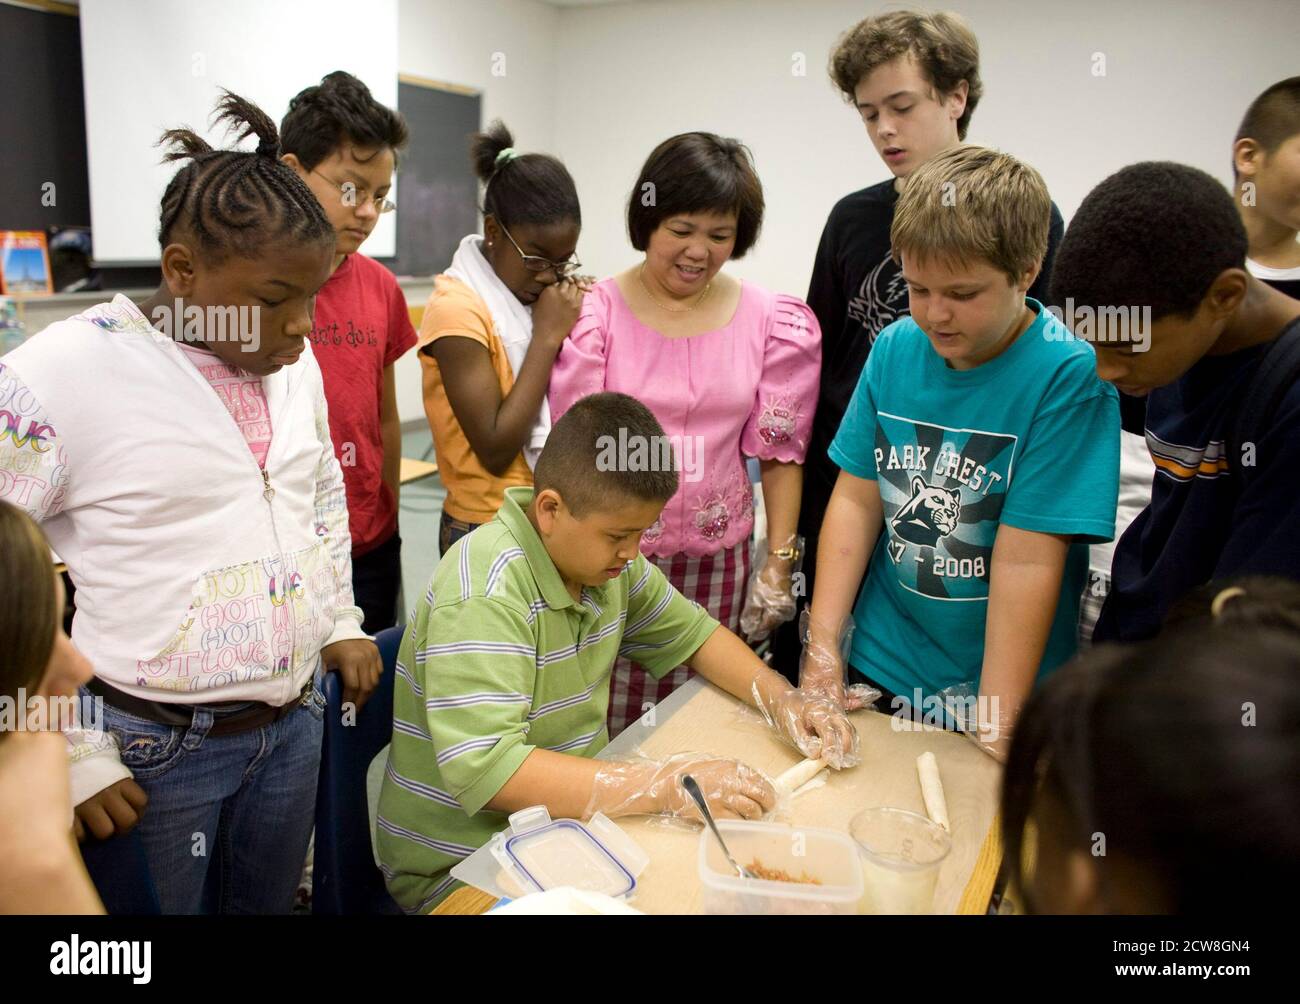 Pflugerville, TX  June 2, 2008: Students making Lumpia, a traditional food of the Phillipines during Park Crest Middle School's 'Diversity Day' with ethnic food, skits, poetry readings and music for sixth through eighth graders. ©Bob Daemmrich Stock Photo